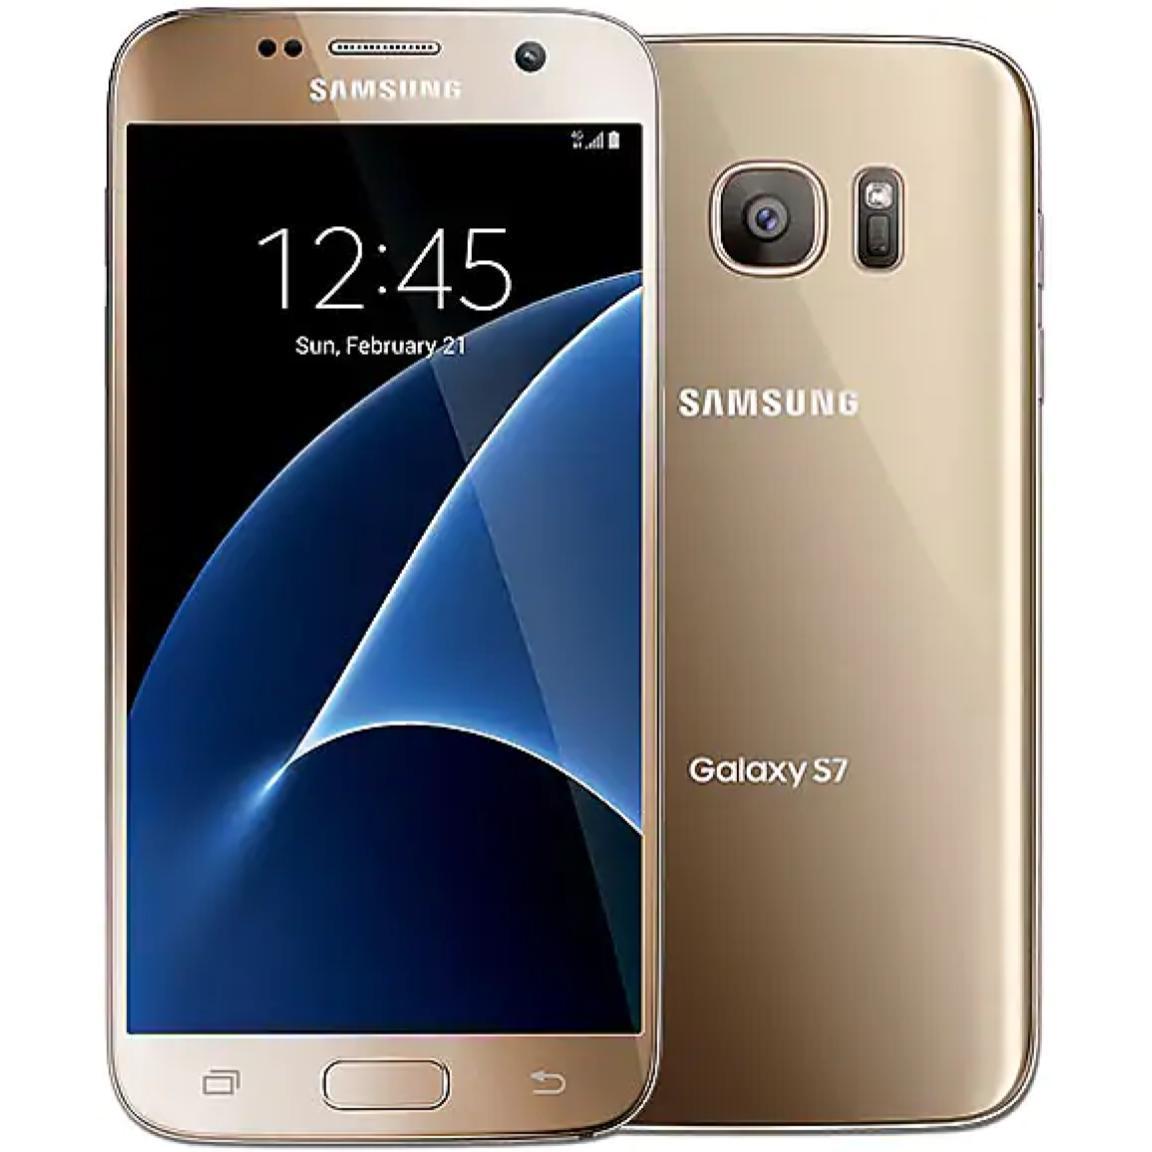 SAMSUNG GALAXY S7: Full Specs, Price & Review